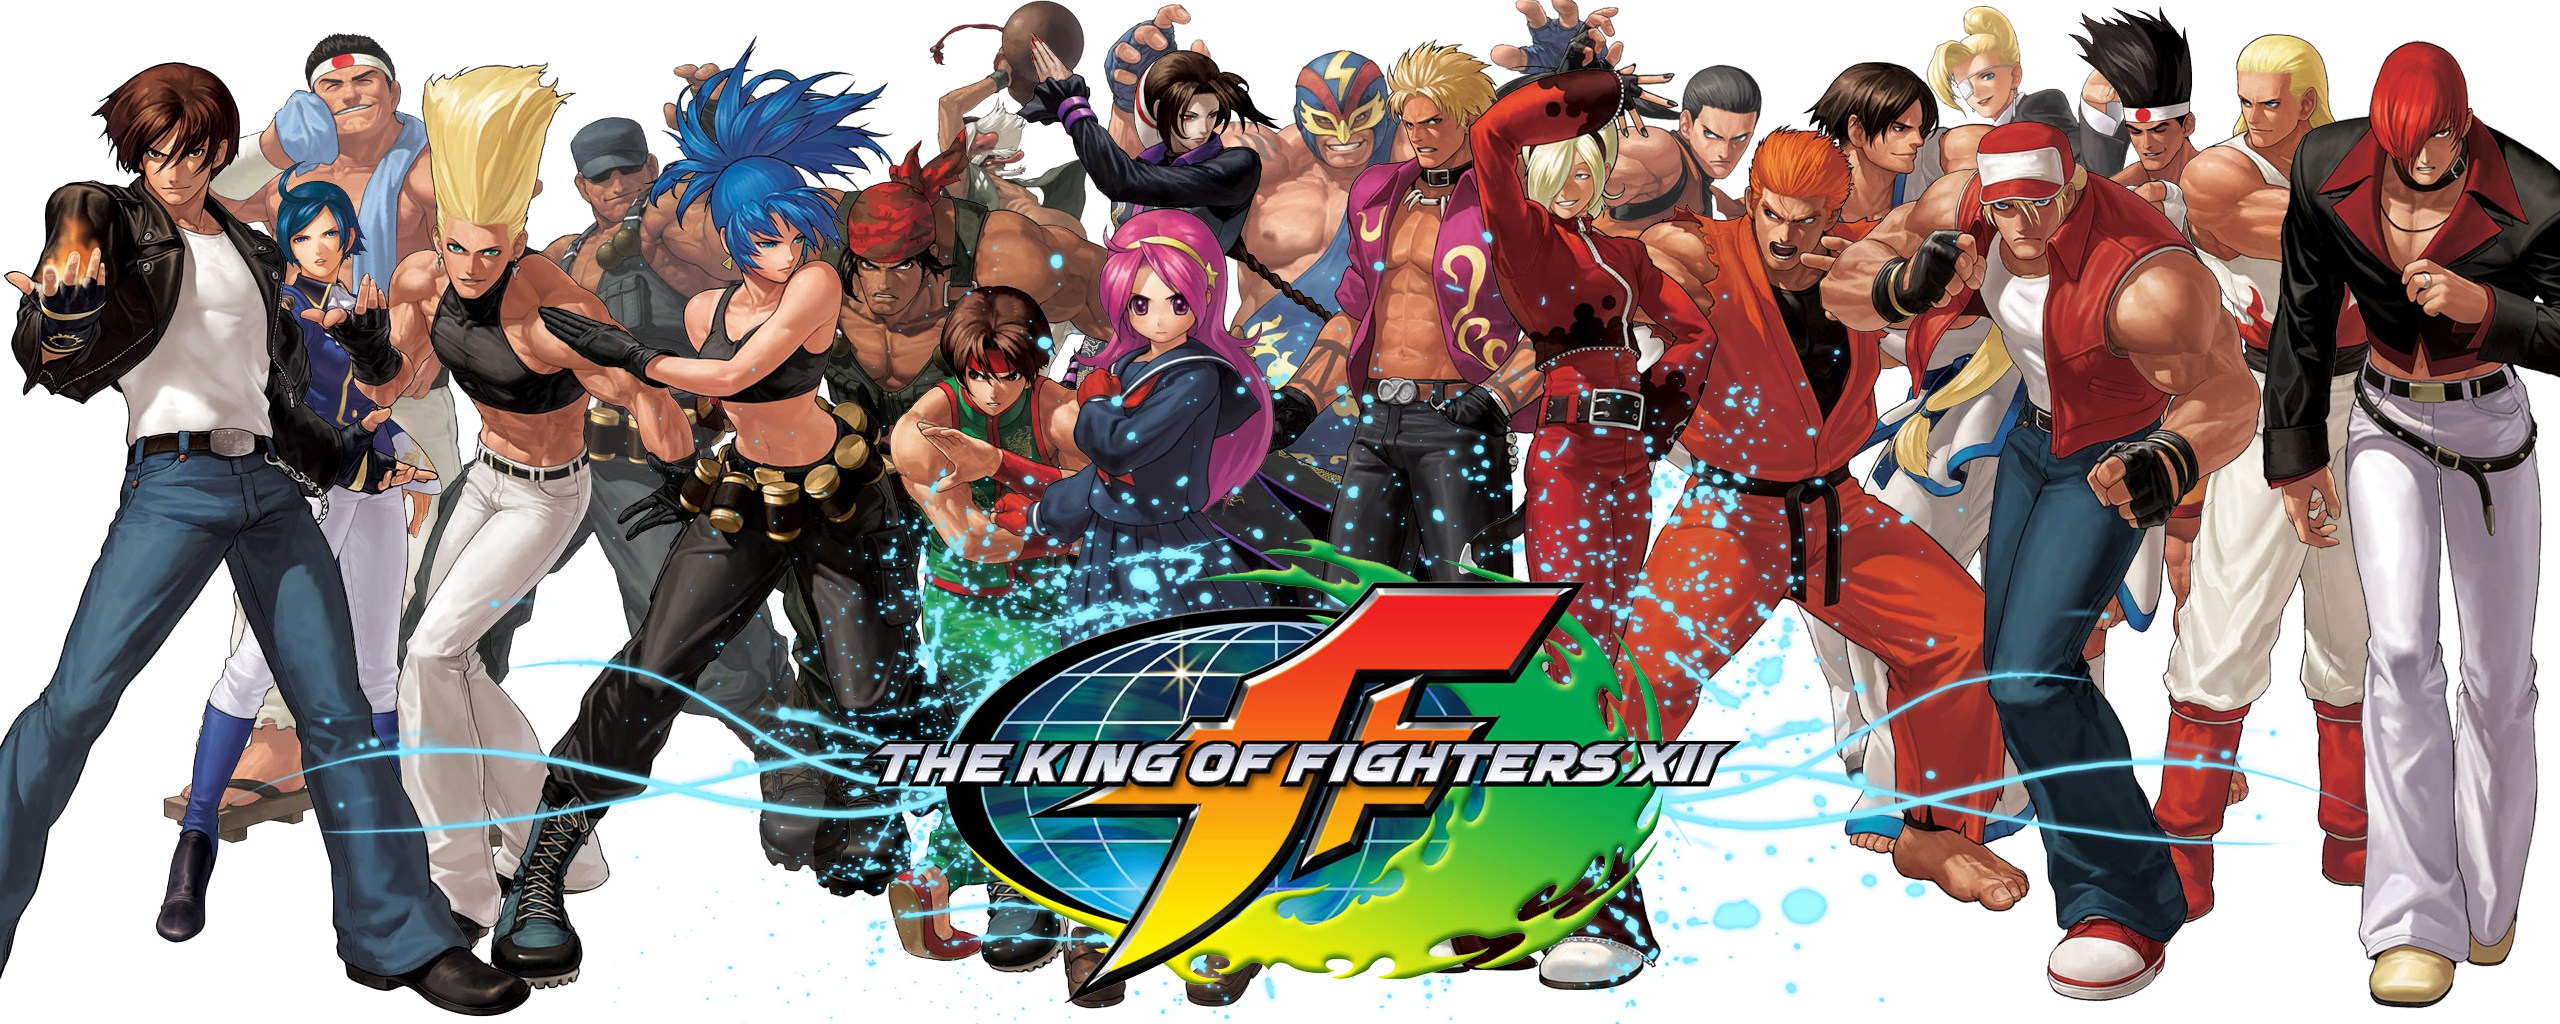 THE KING OF FIGHTERS Anime and Live Action Announced